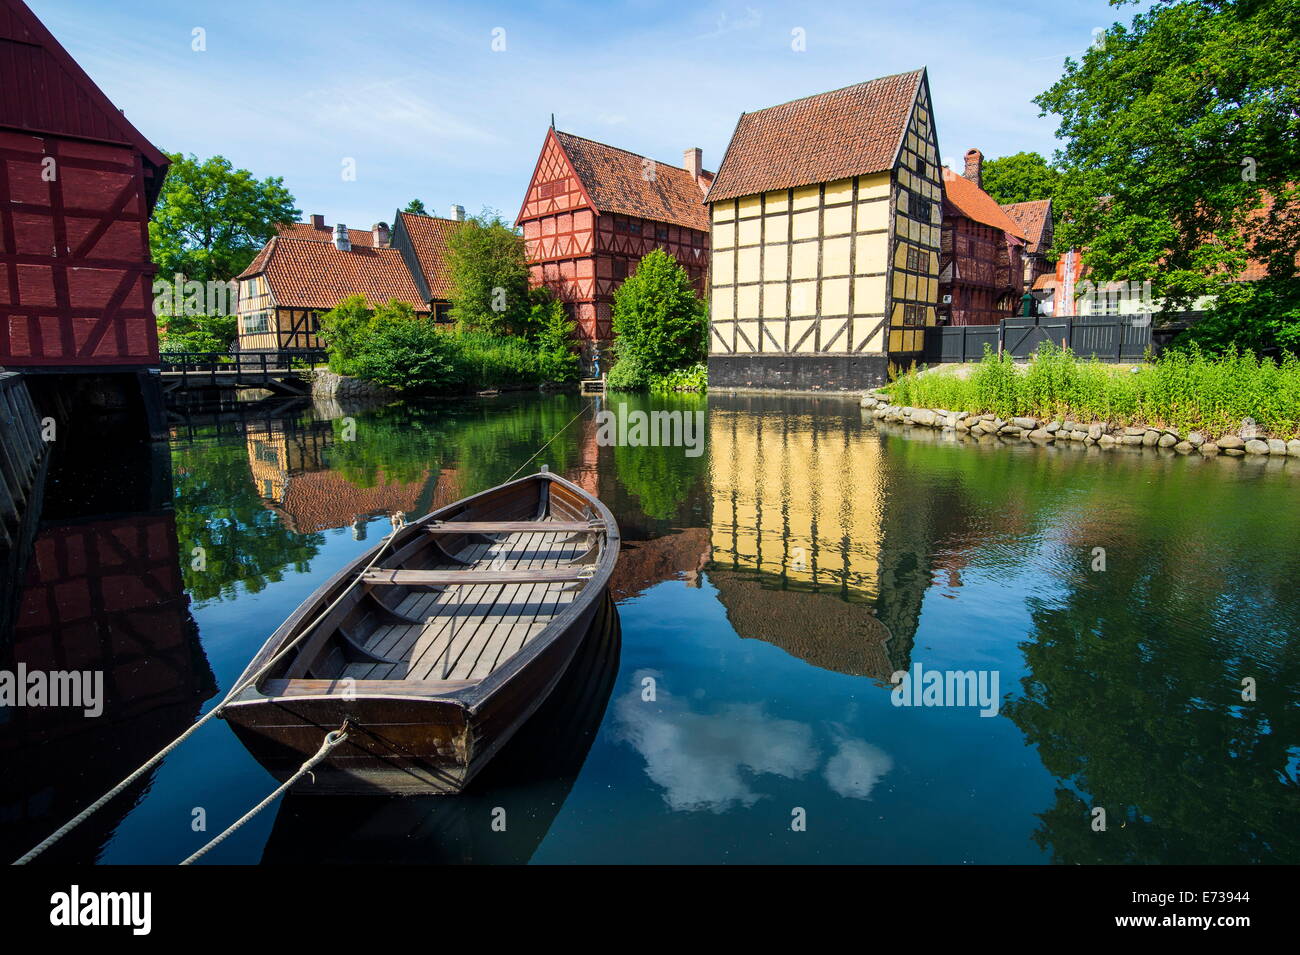 Little boat in a pond in the Old Town, Den Gamle By, open air museum in Aarhus, Denmark, Scandinavia, Europe Stock Photo